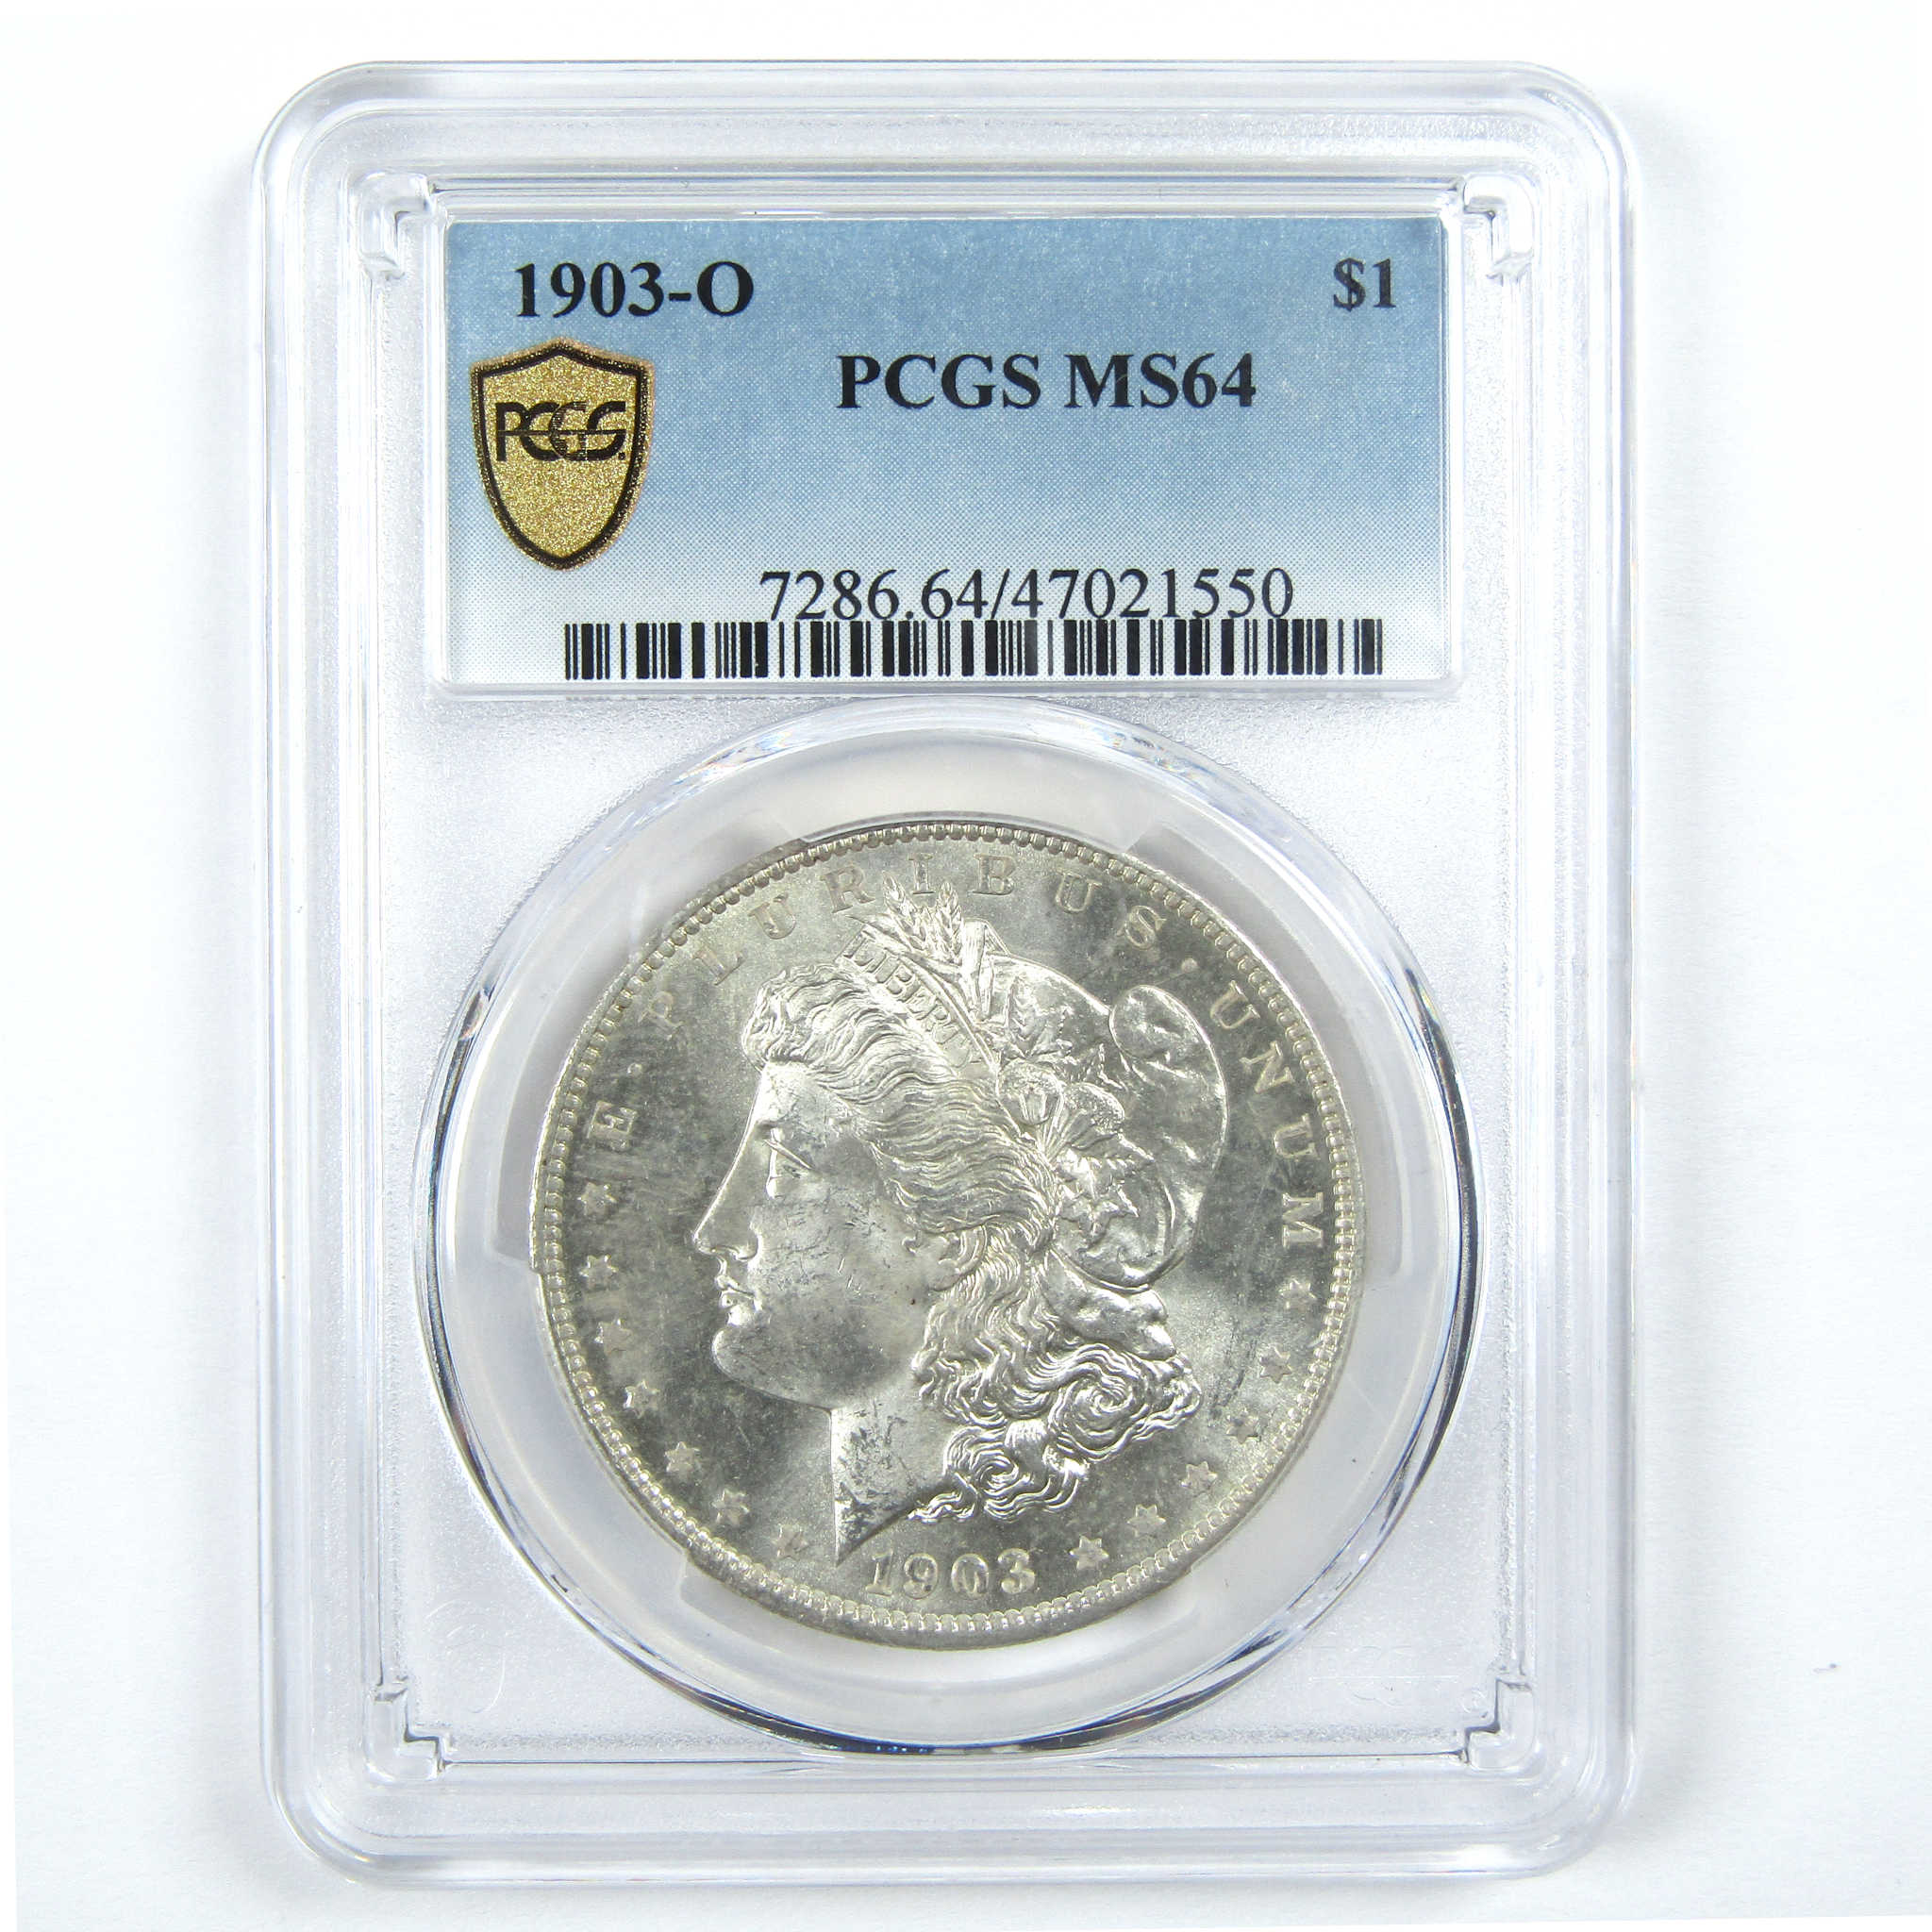 1903 O Morgan Dollar MS 64 PCGS Silver $1 Uncirculated Coin SKU:I13390 - Morgan coin - Morgan silver dollar - Morgan silver dollar for sale - Profile Coins &amp; Collectibles